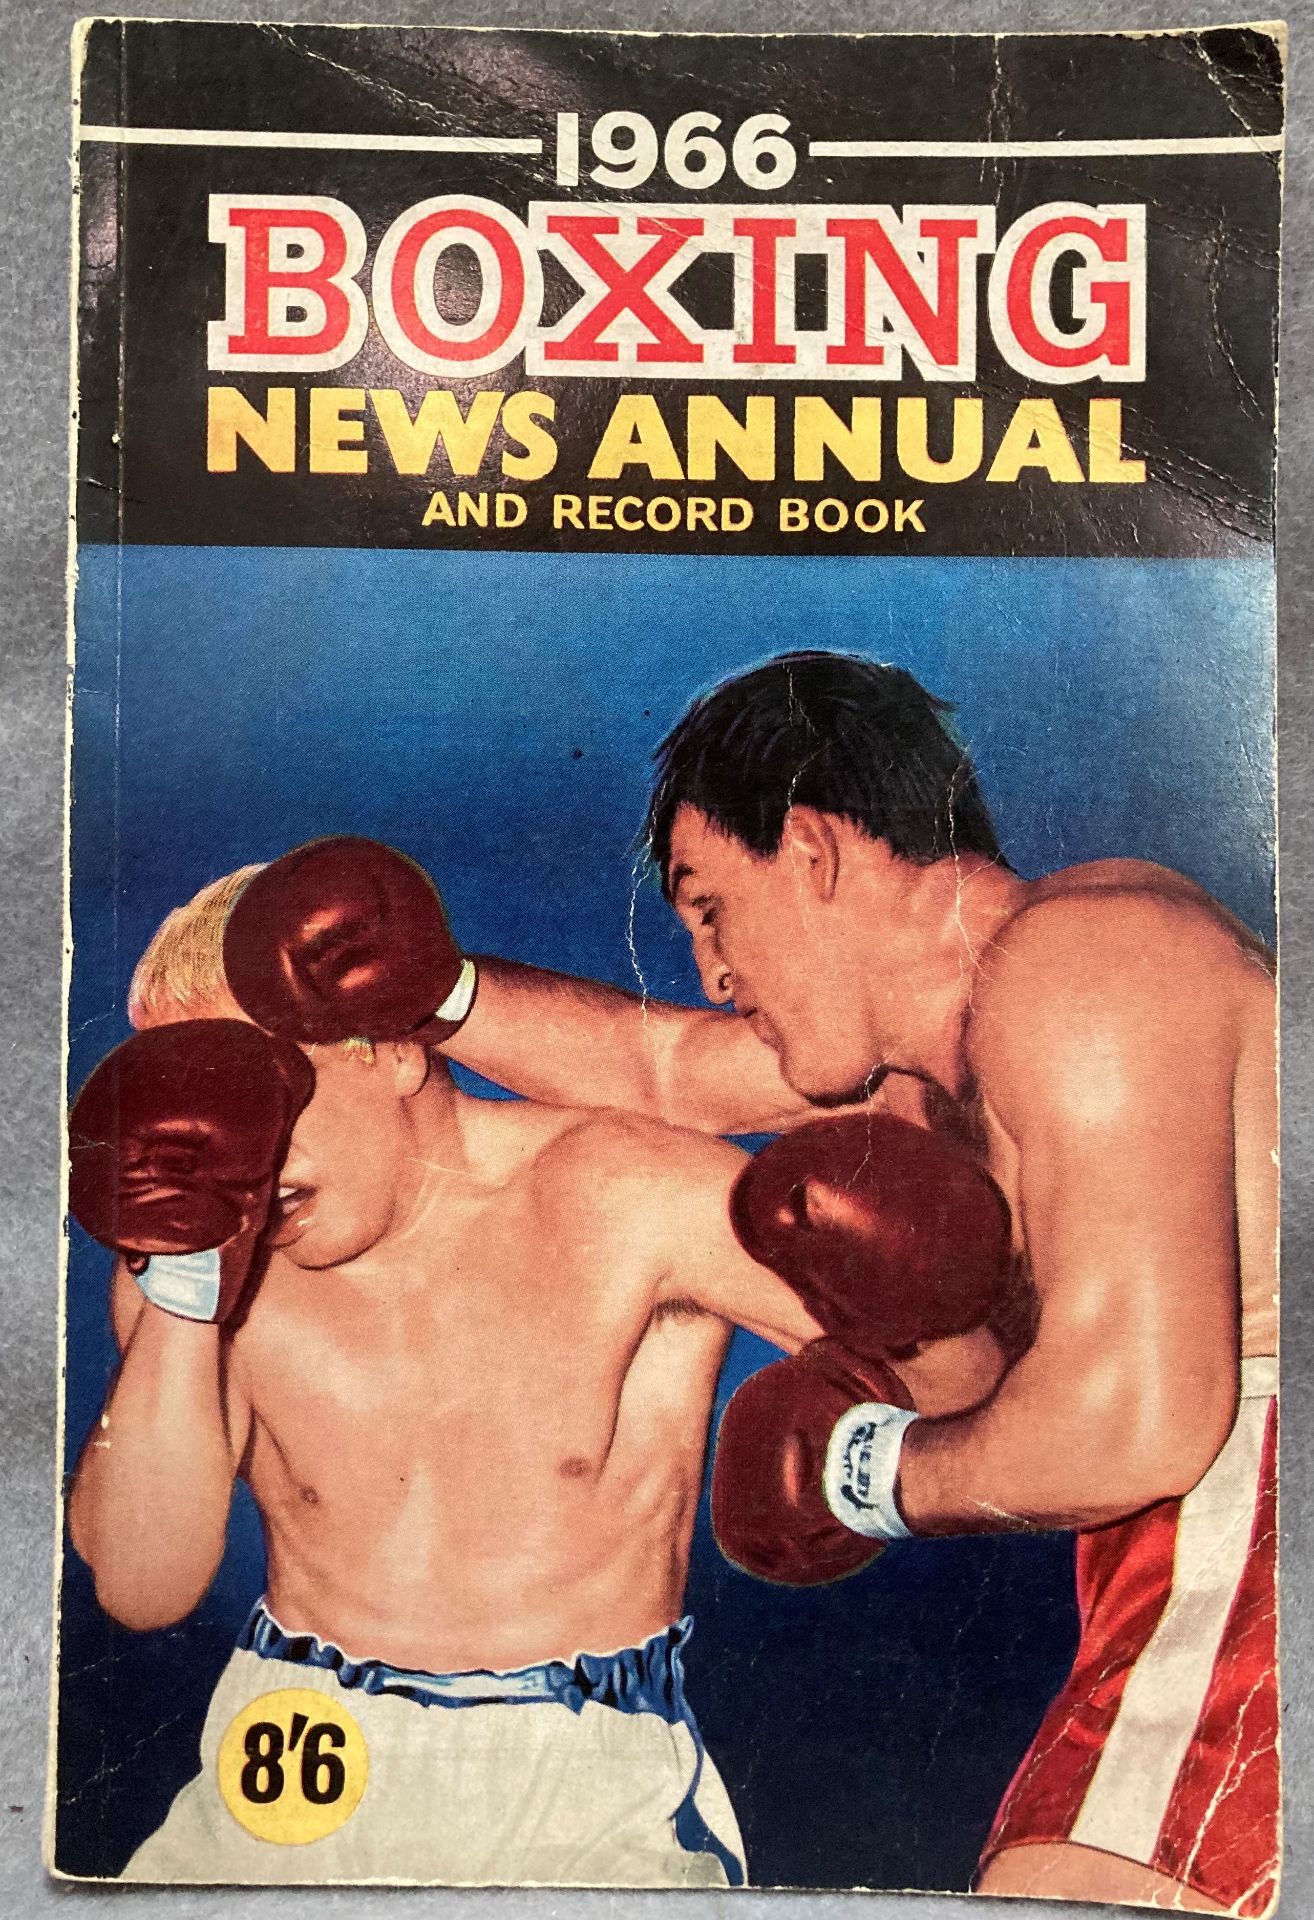 A 1966 Boxing News Annual and Record book with references to Peter Carney and Mick Carney